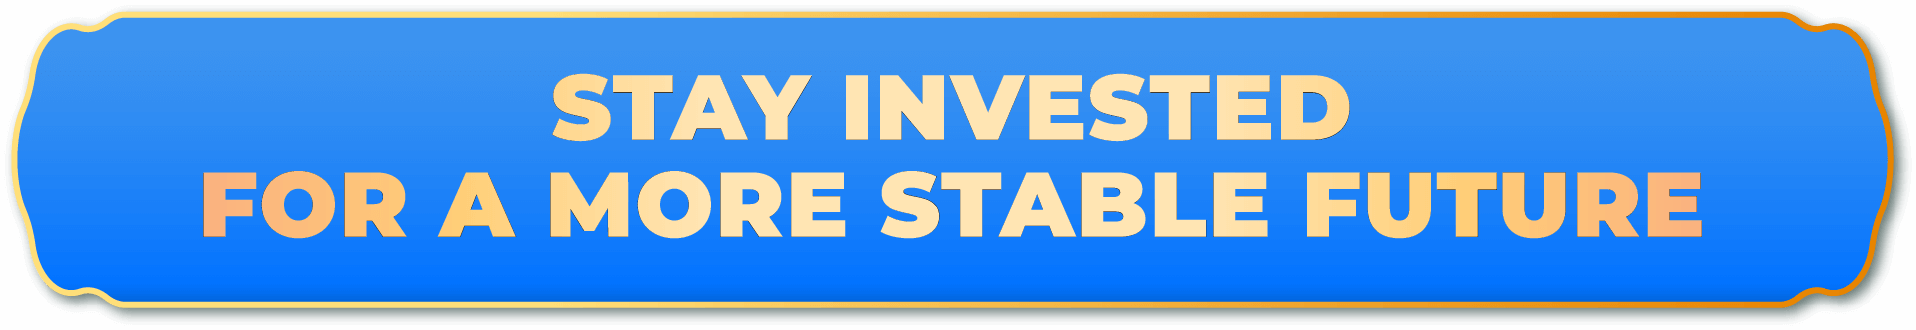 STAY INVESTED FOR A MORE STABLE FUTURE